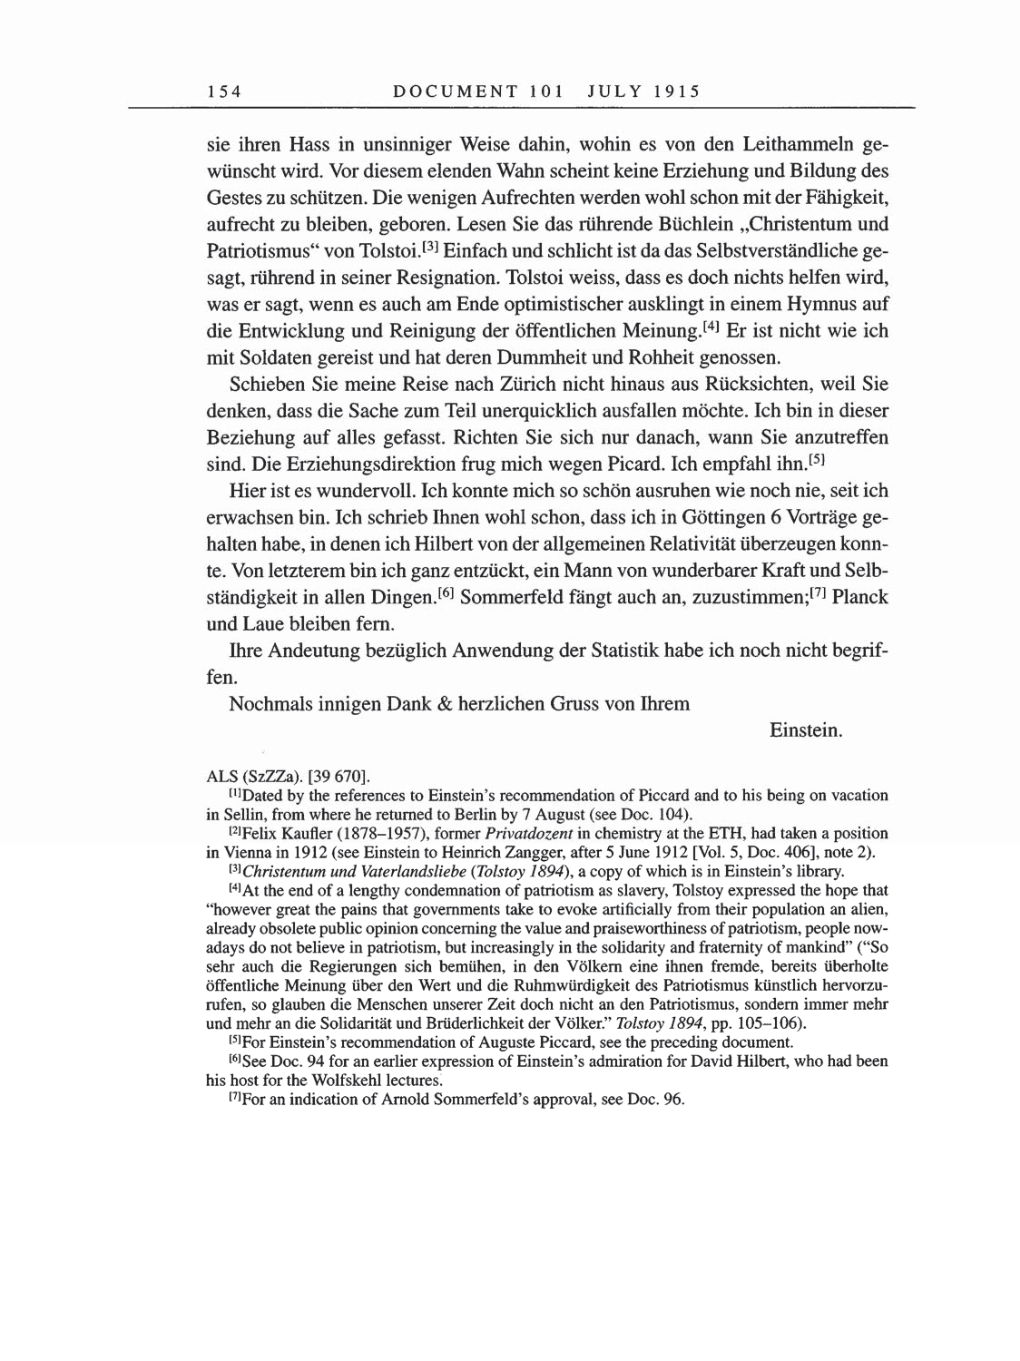 Volume 8, Part A: The Berlin Years: Correspondence 1914-1917 page 154